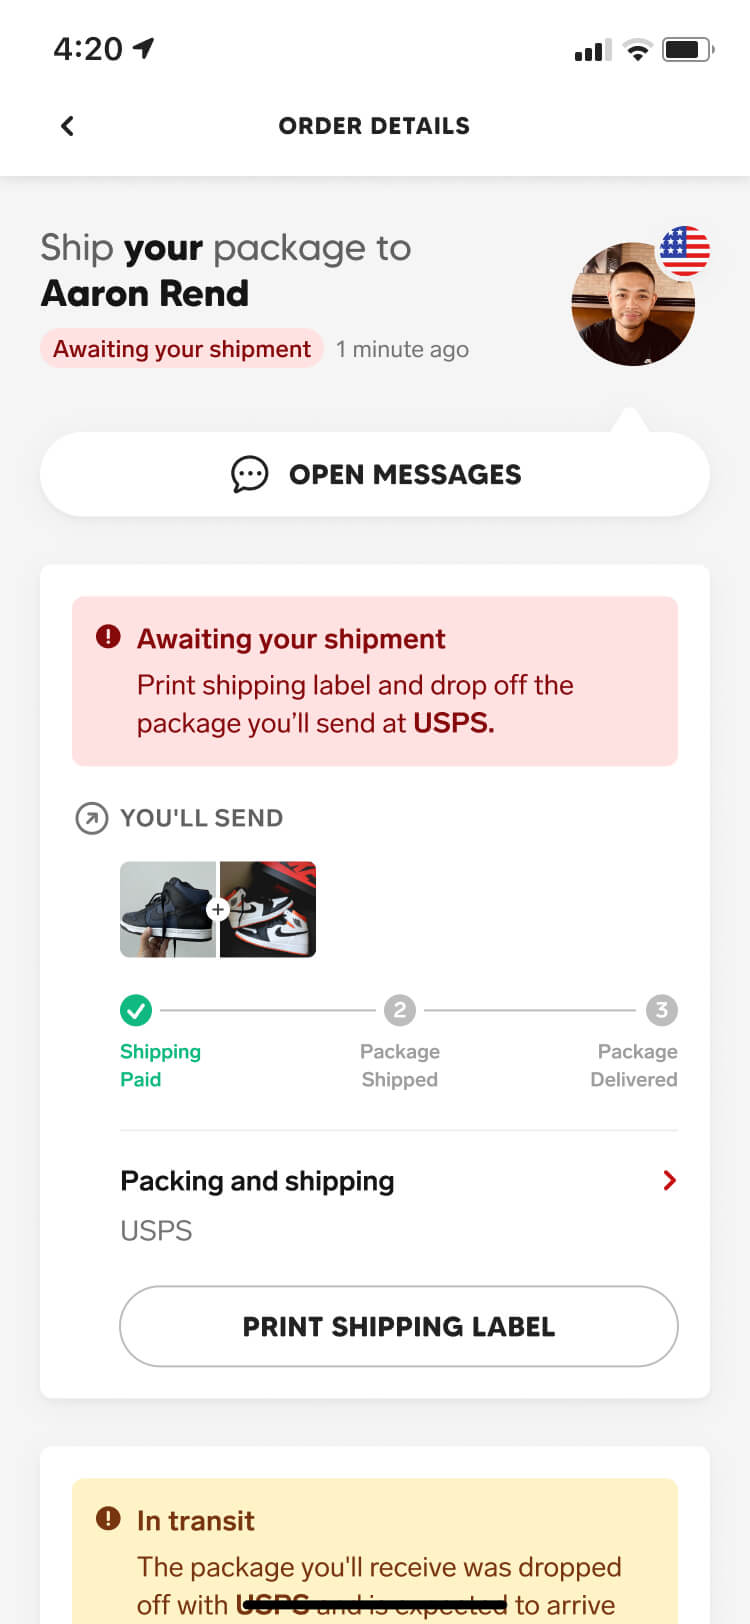 Order awaiting your shipment screenshot of the Collect mobile app